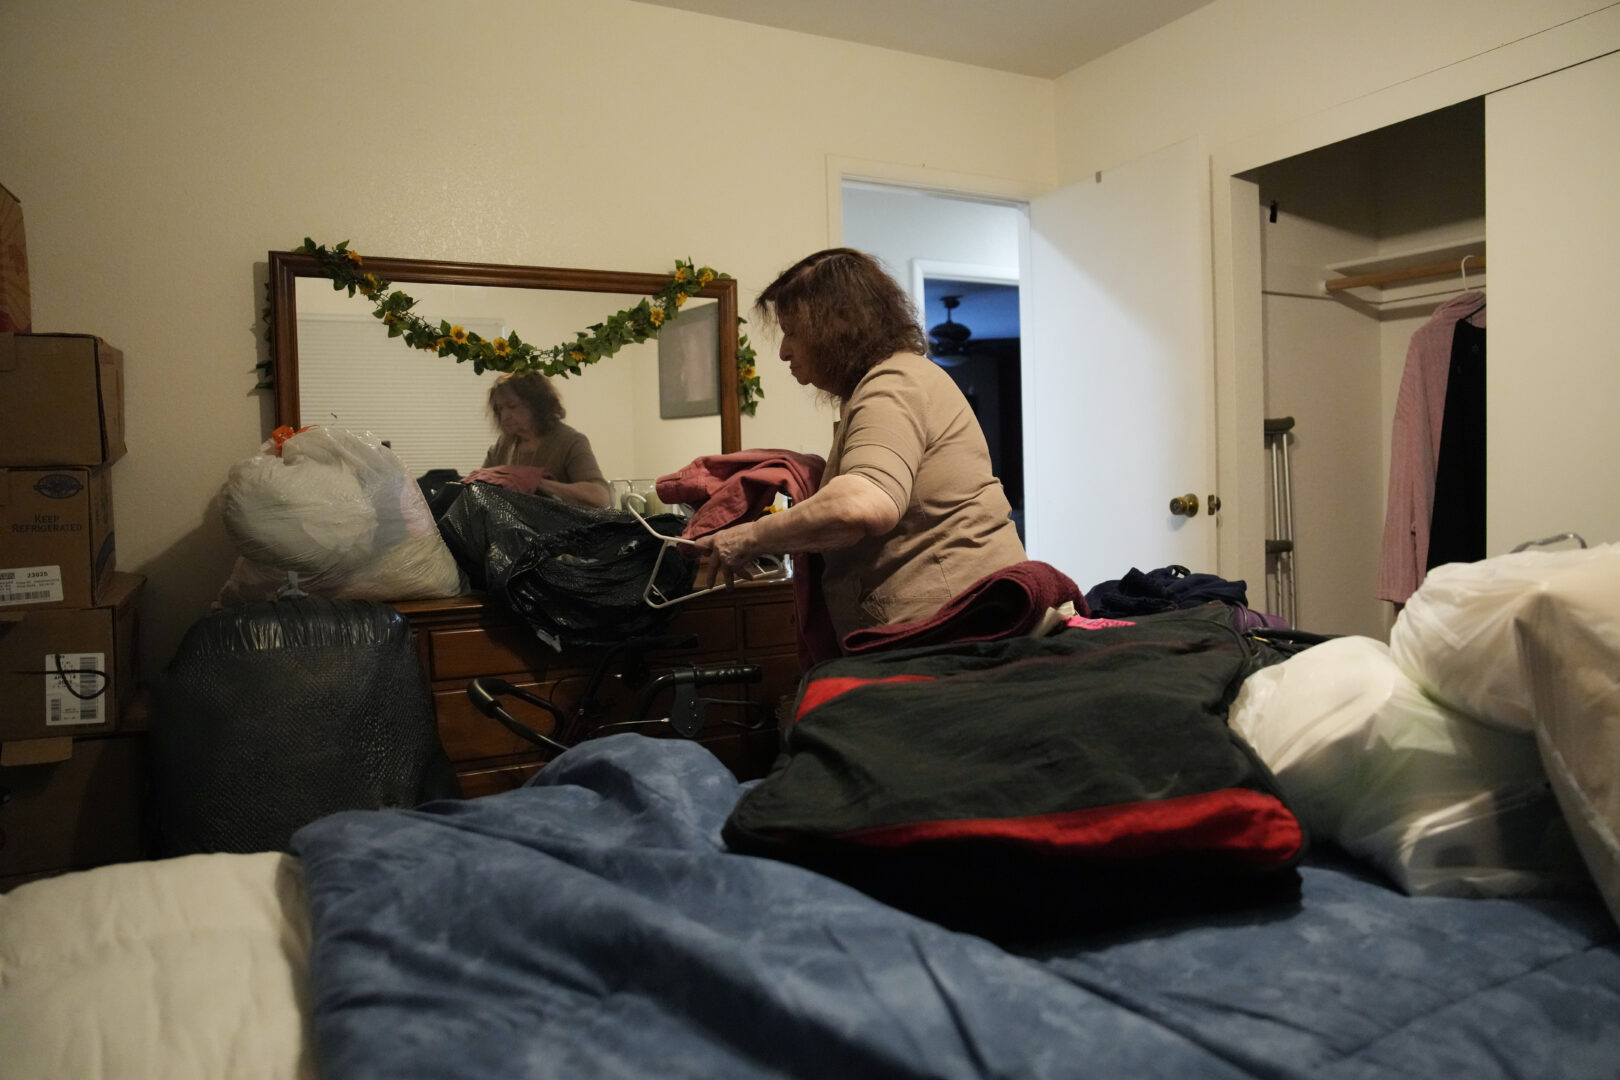 Maria Jackson unpacks clothes into a room she is renting Monday, May 8, 2023, in Las Vegas. Jackson, a longtime massage therapist, lost her customers when the pandemic triggered a statewide shutdown in March 2020 and was evicted from her apartment earlier this year. (AP Photo/John Locher)